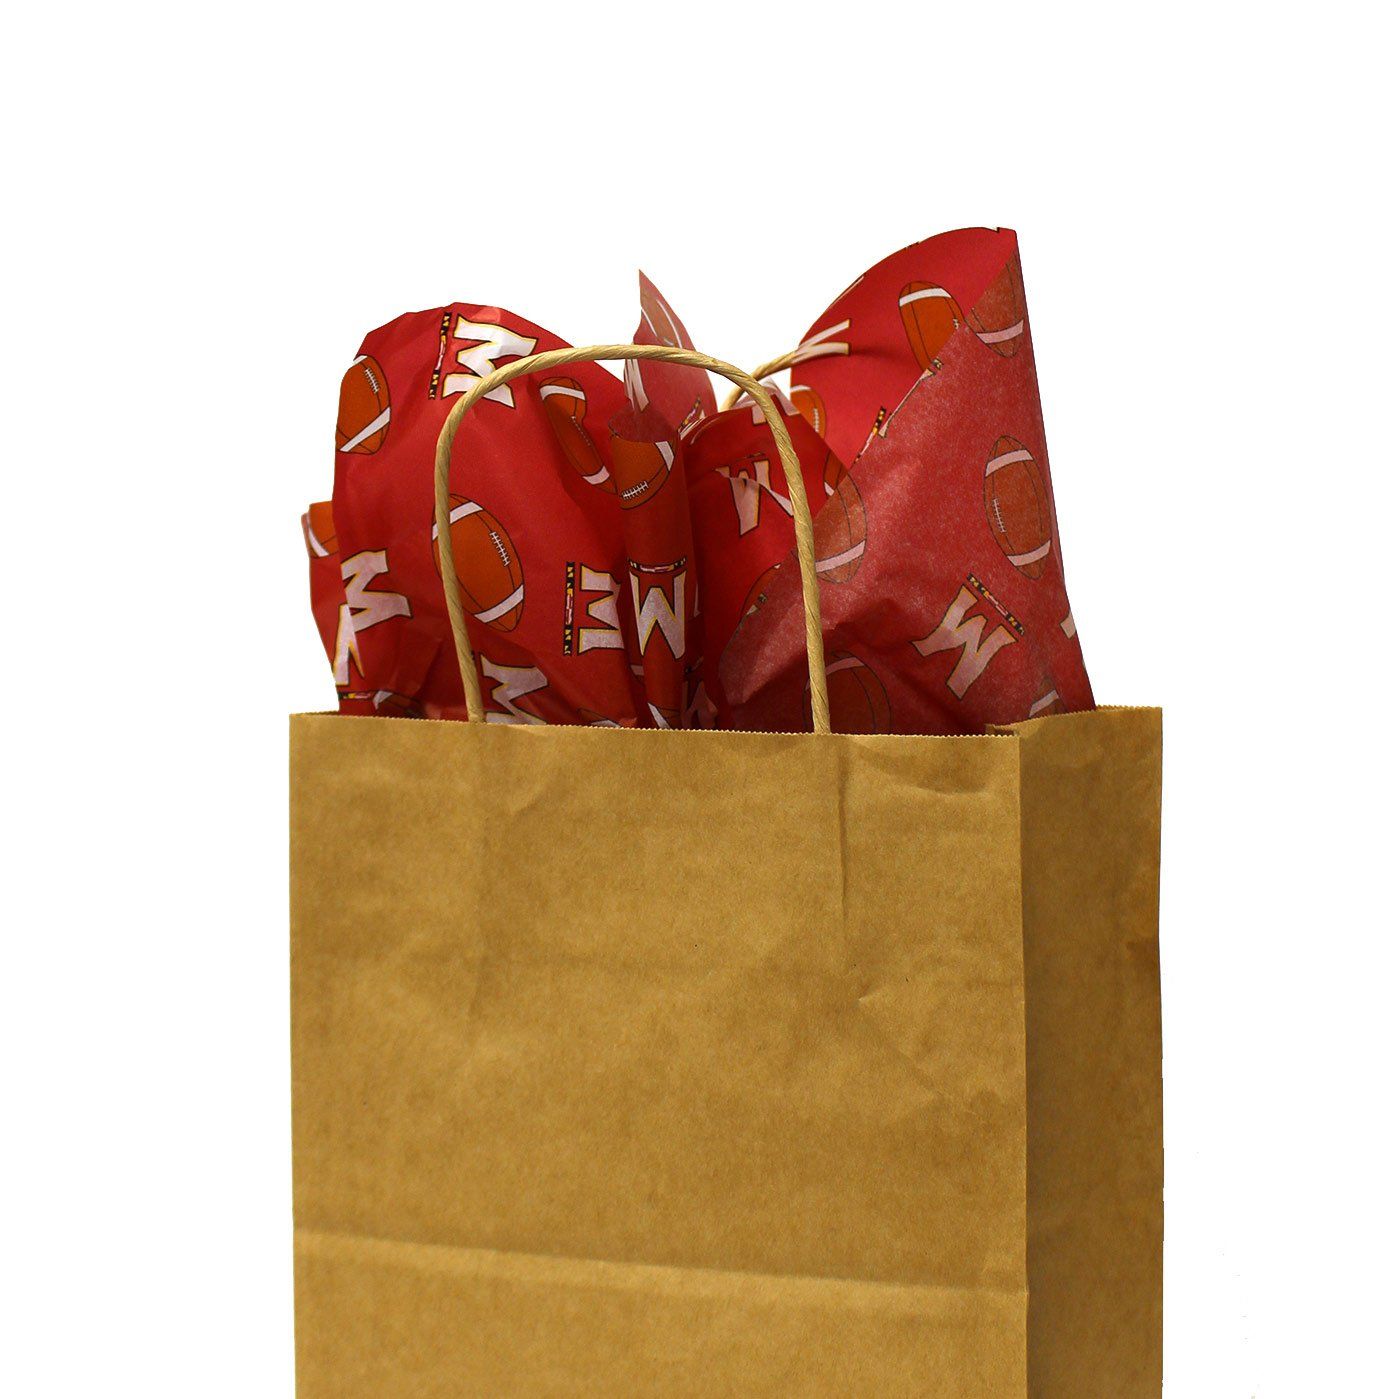 UMD Football and "M" Logo Pattern / Tissue Paper Pack - Route One Apparel